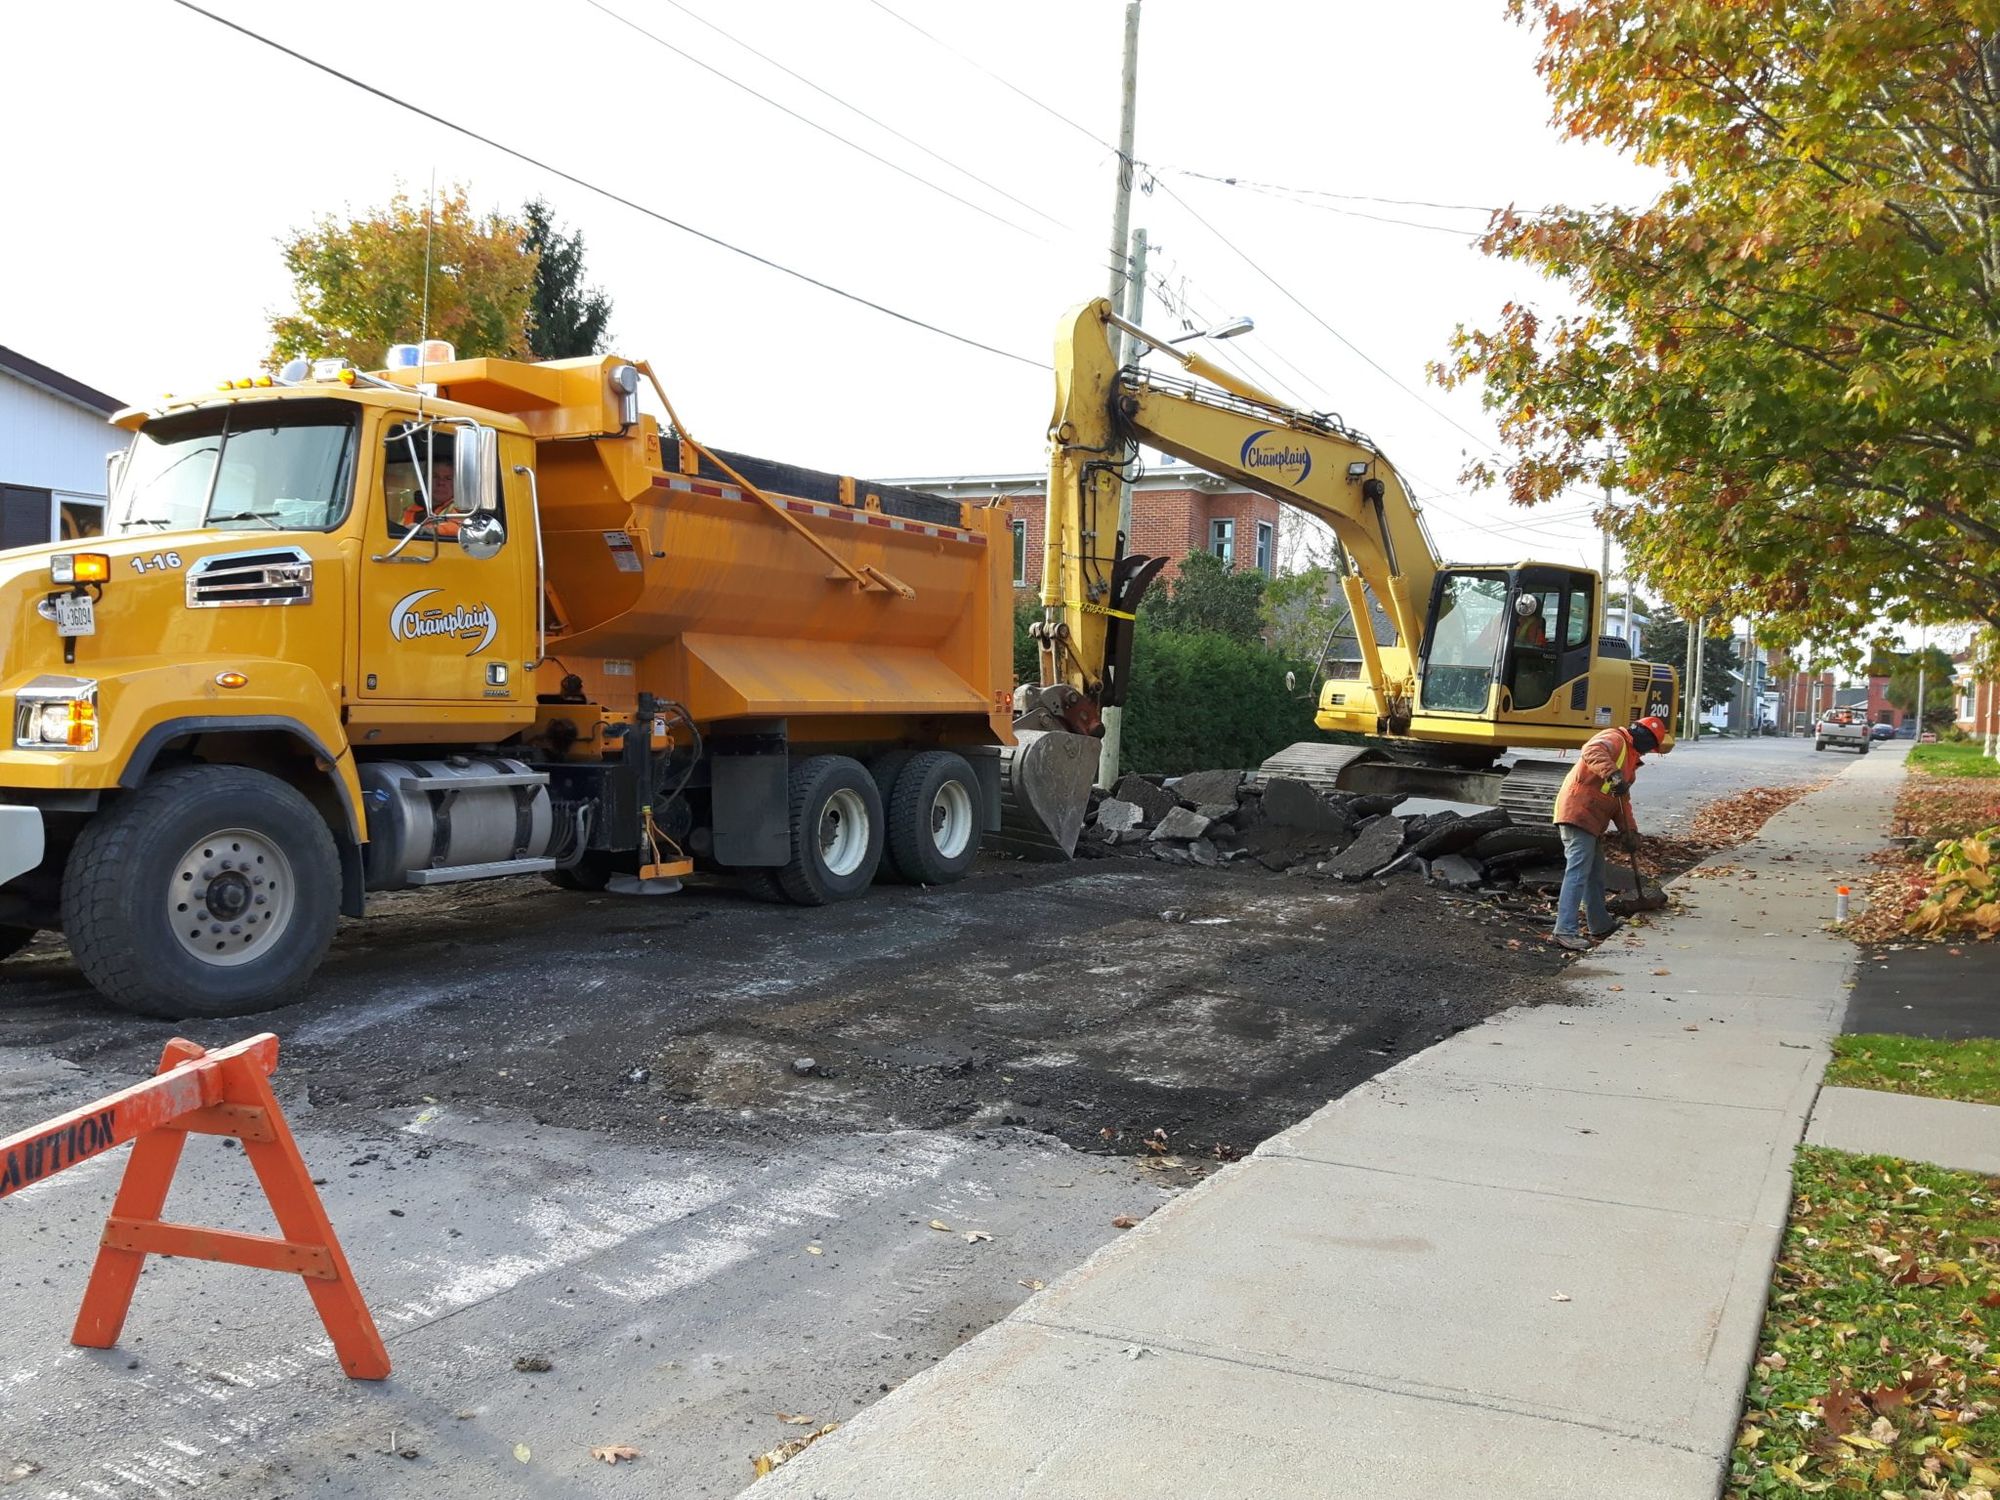 No advance notice of Derby Street construction, says resident